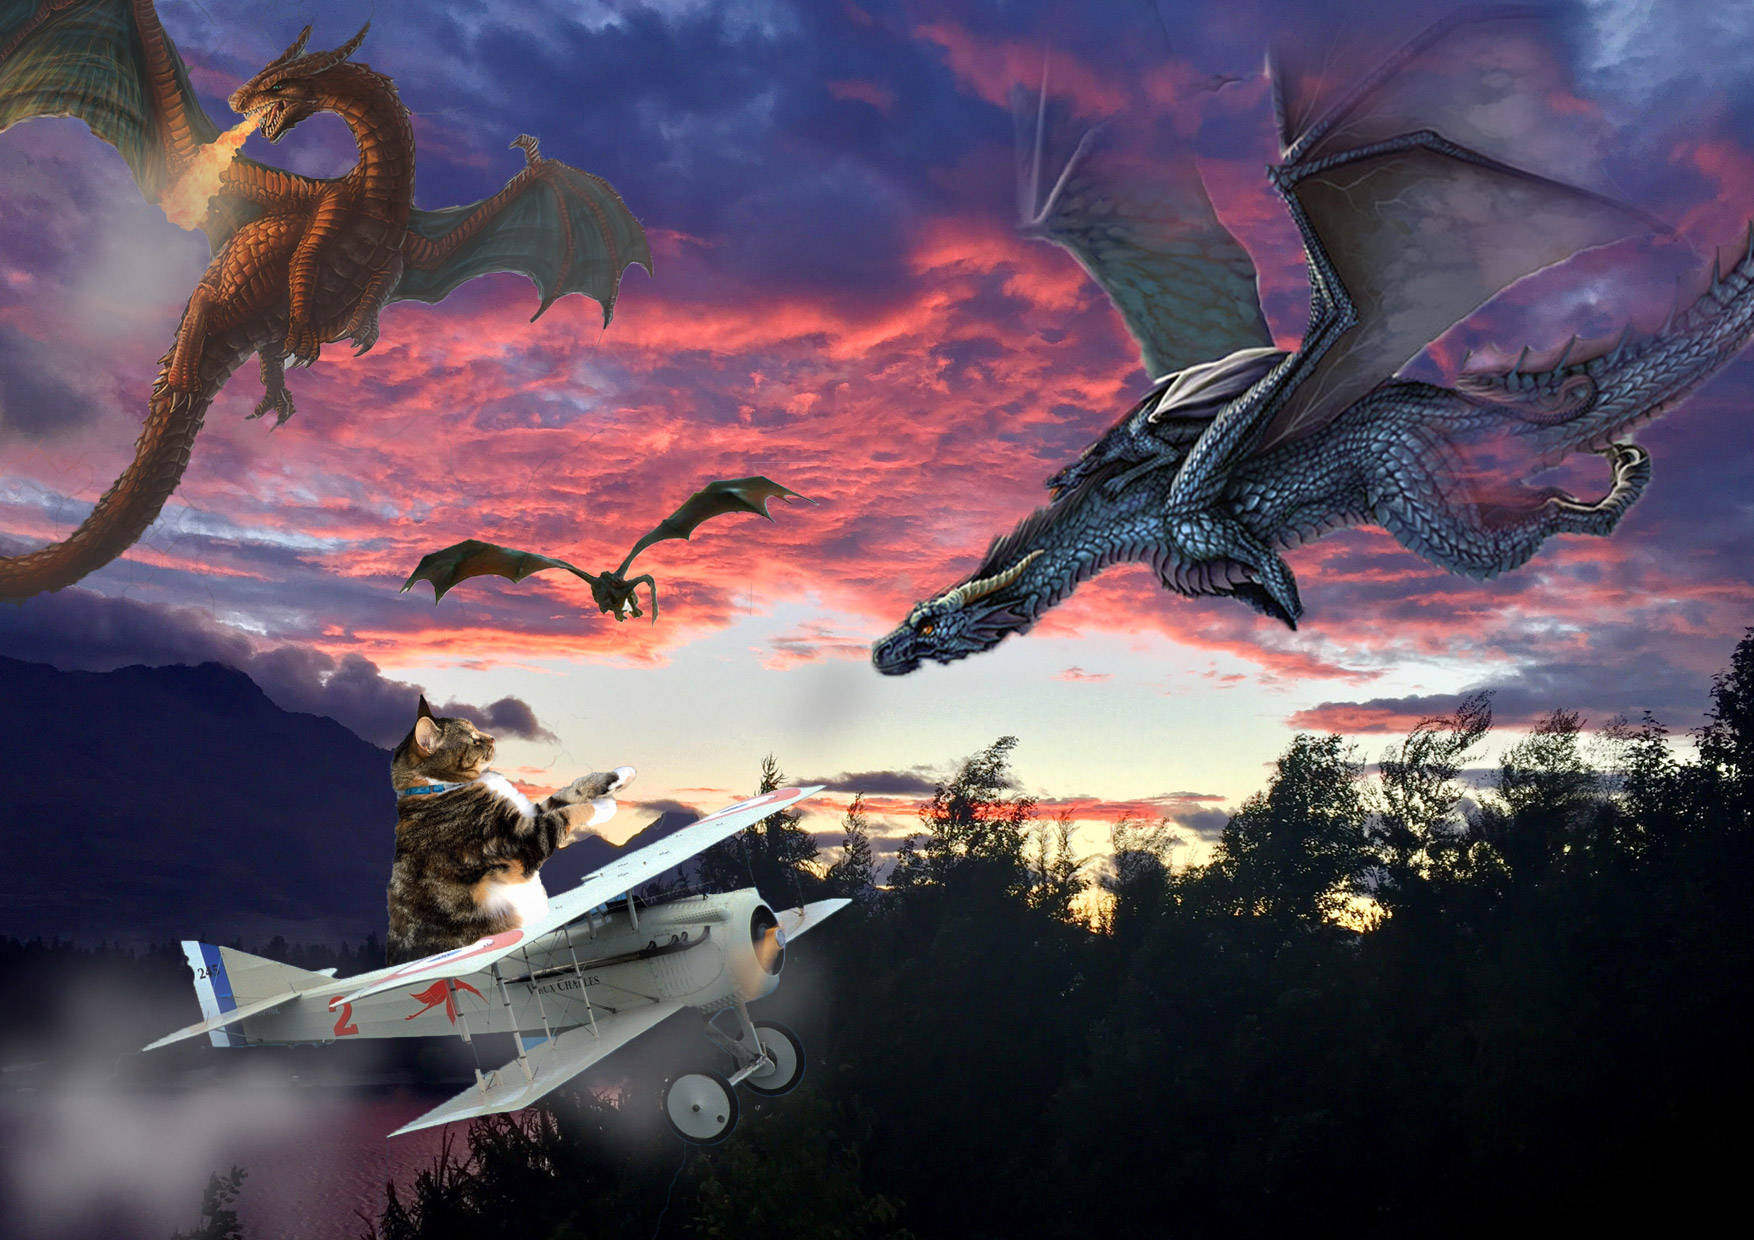 Dragons in the sky